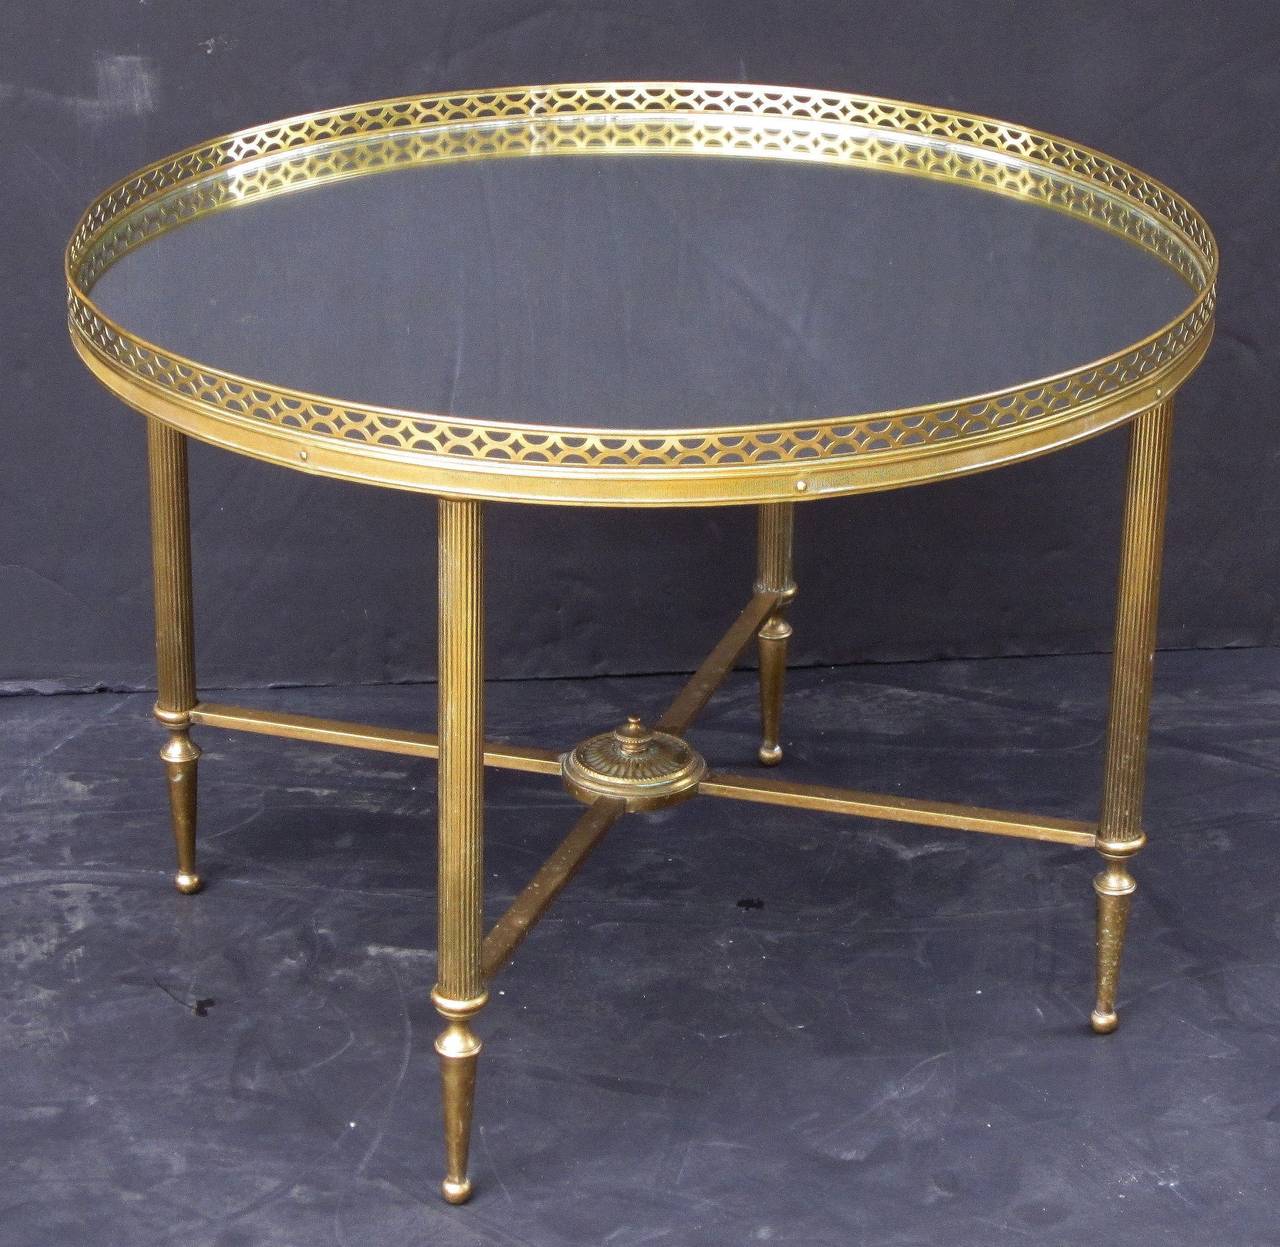 A fine French low table of brass (23 3/4